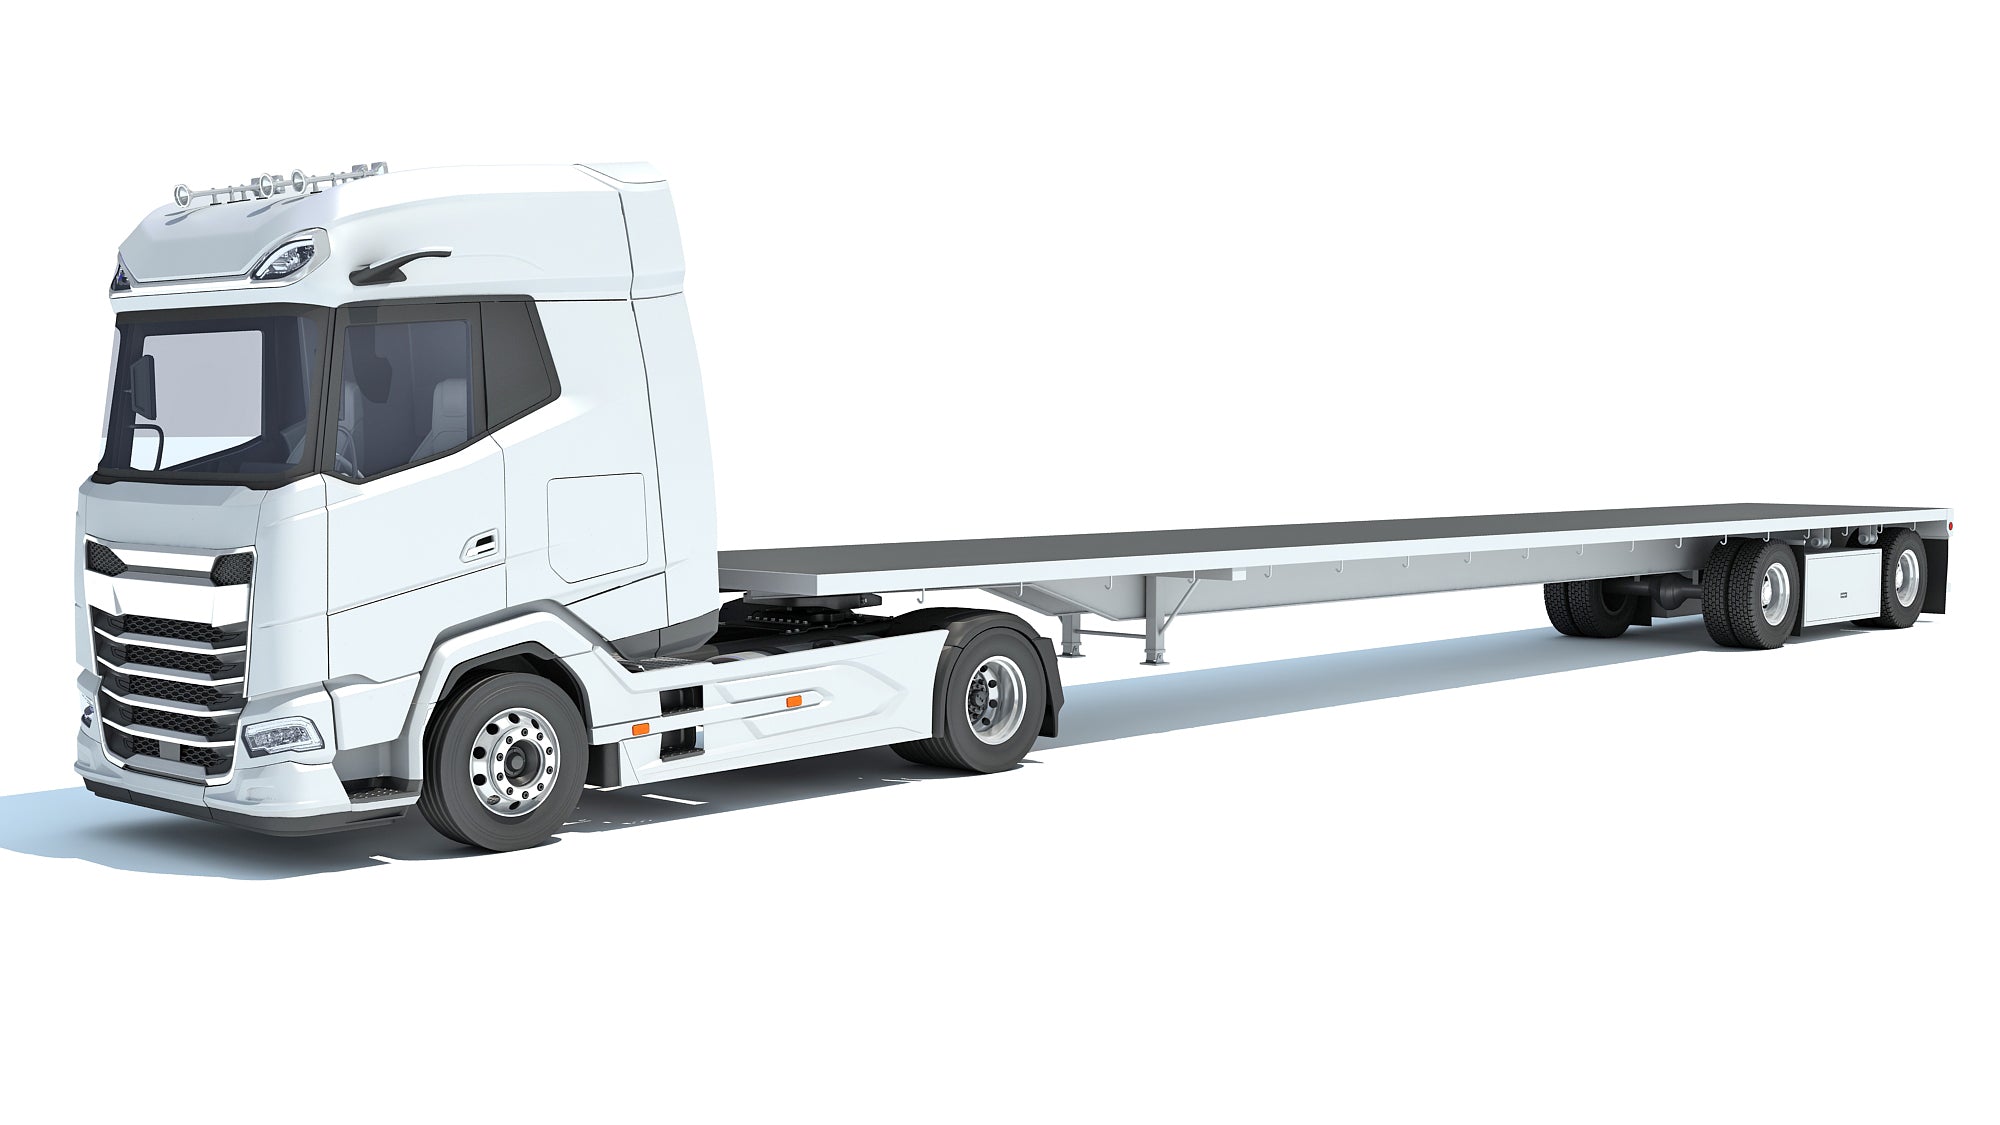 Truck with Flatbed Trailer - DAF